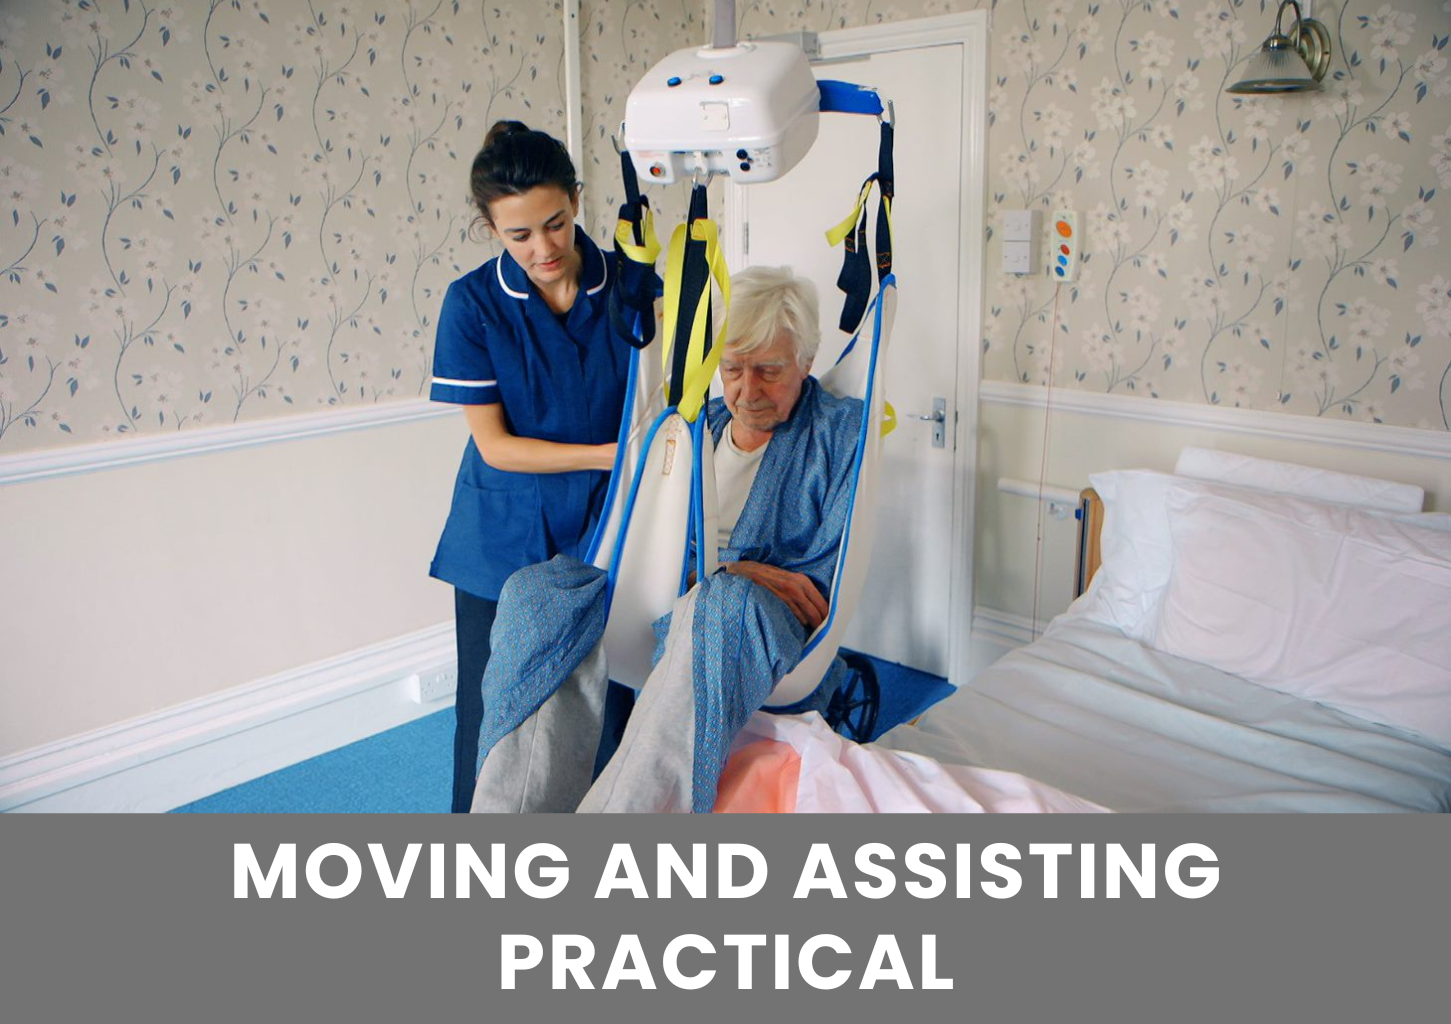 Care worker demonstrating Moving and Assisting a patient